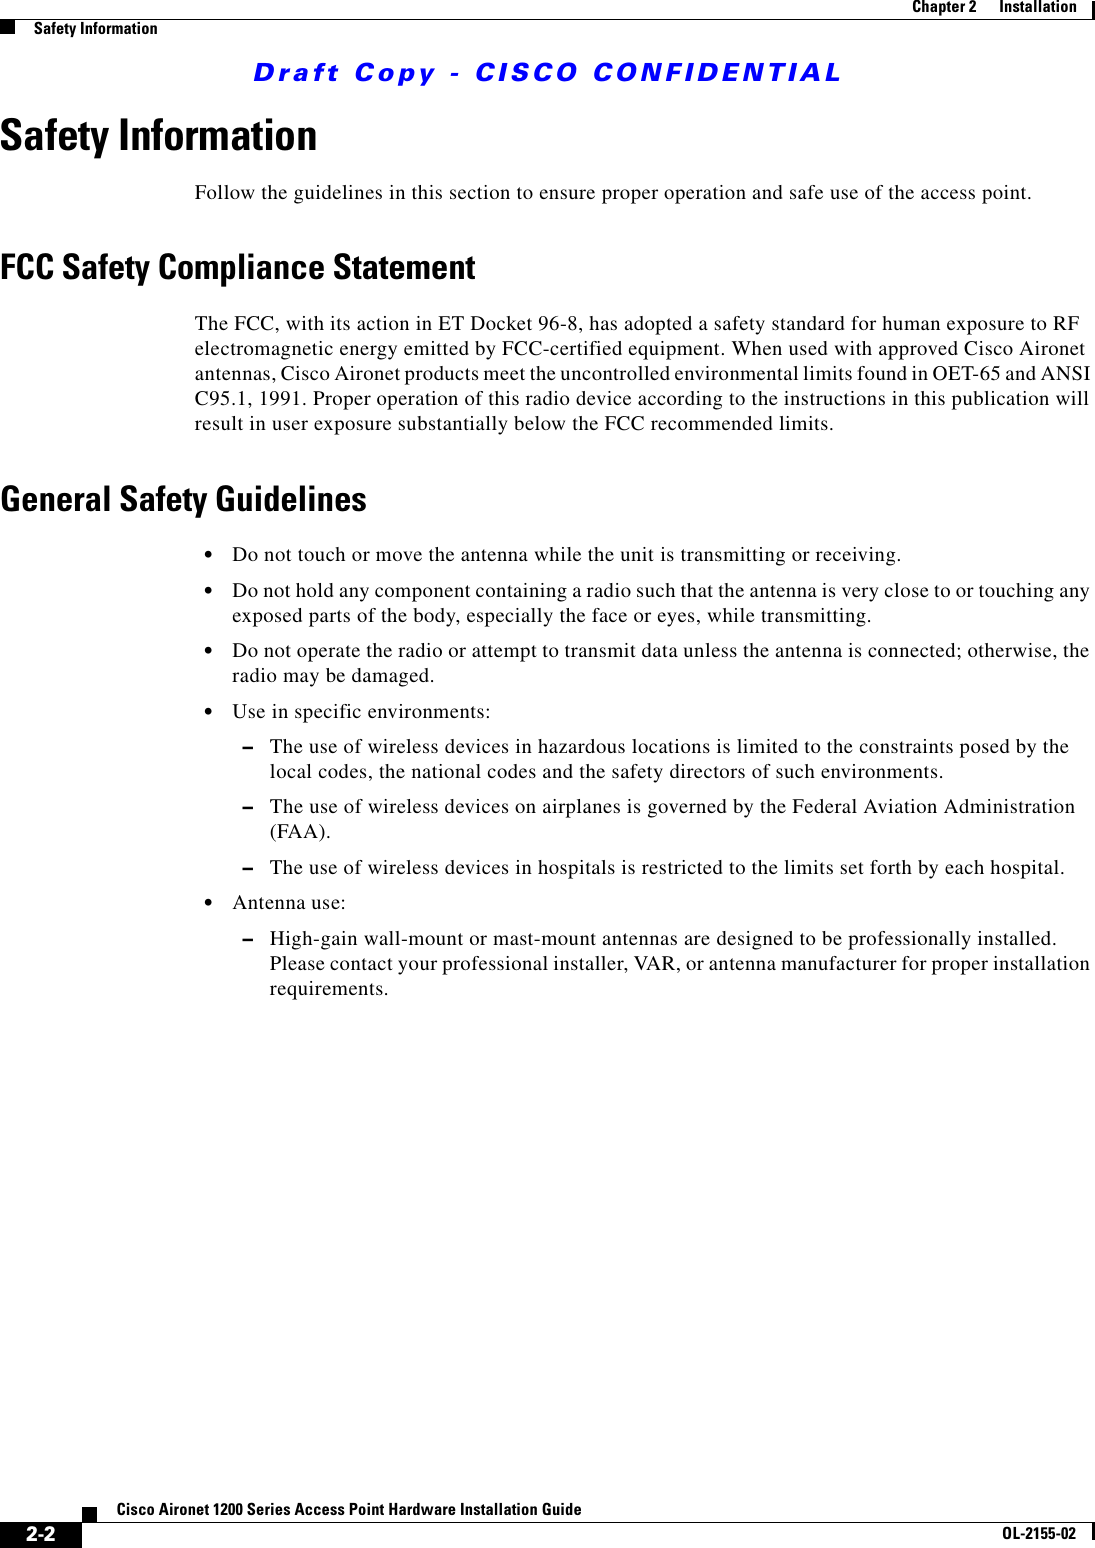 Draft Copy - CISCO CONFIDENTIAL 2-2Cisco Aironet 1200 Series Access Point Hardware Installation GuideOL-2155-02Chapter 2      InstallationSafety InformationSafety InformationFollow the guidelines in this section to ensure proper operation and safe use of the access point.FCC Safety Compliance StatementThe FCC, with its action in ET Docket 96-8, has adopted a safety standard for human exposure to RF electromagnetic energy emitted by FCC-certified equipment. When used with approved Cisco Aironet antennas, Cisco Aironet products meet the uncontrolled environmental limits found in OET-65 and ANSI C95.1, 1991. Proper operation of this radio device according to the instructions in this publication will result in user exposure substantially below the FCC recommended limits.General Safety Guidelines•Do not touch or move the antenna while the unit is transmitting or receiving.•Do not hold any component containing a radio such that the antenna is very close to or touching any exposed parts of the body, especially the face or eyes, while transmitting.•Do not operate the radio or attempt to transmit data unless the antenna is connected; otherwise, the radio may be damaged.•Use in specific environments:–The use of wireless devices in hazardous locations is limited to the constraints posed by the local codes, the national codes and the safety directors of such environments.–The use of wireless devices on airplanes is governed by the Federal Aviation Administration (FAA).–The use of wireless devices in hospitals is restricted to the limits set forth by each hospital.•Antenna use:–High-gain wall-mount or mast-mount antennas are designed to be professionally installed. Please contact your professional installer, VAR, or antenna manufacturer for proper installation requirements.